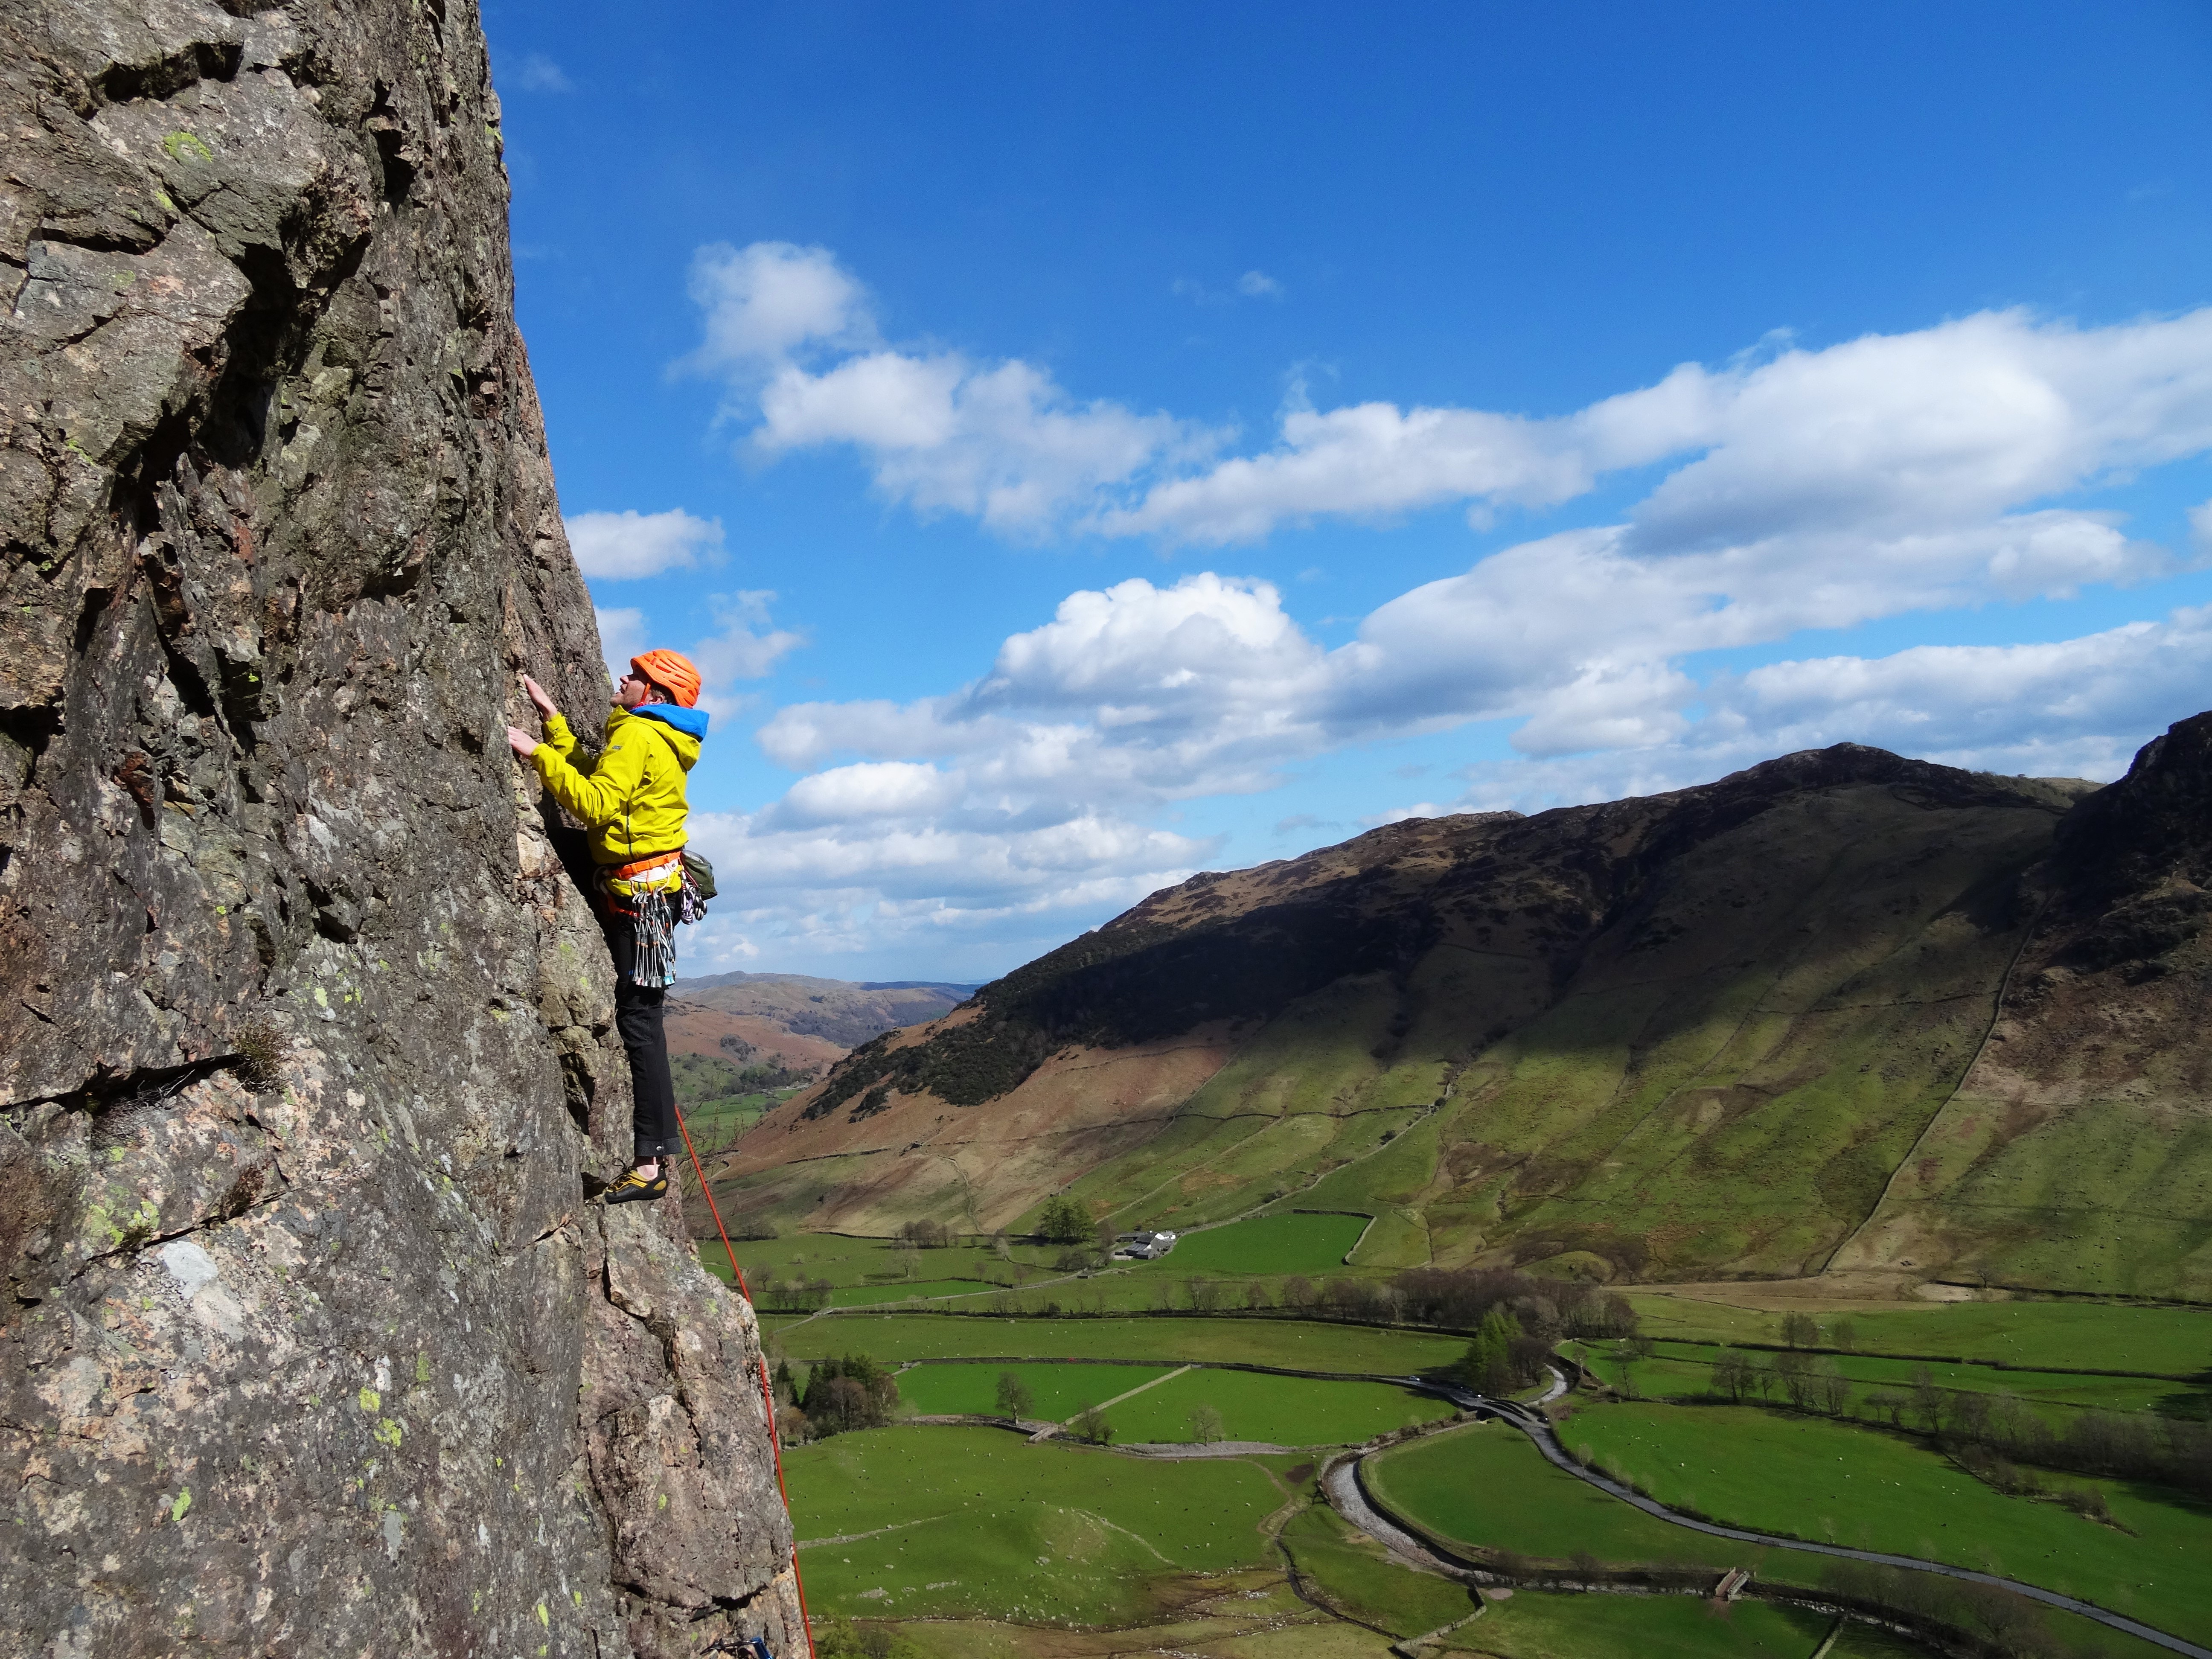 Get out climbing in the Lake District with Arc’teryx